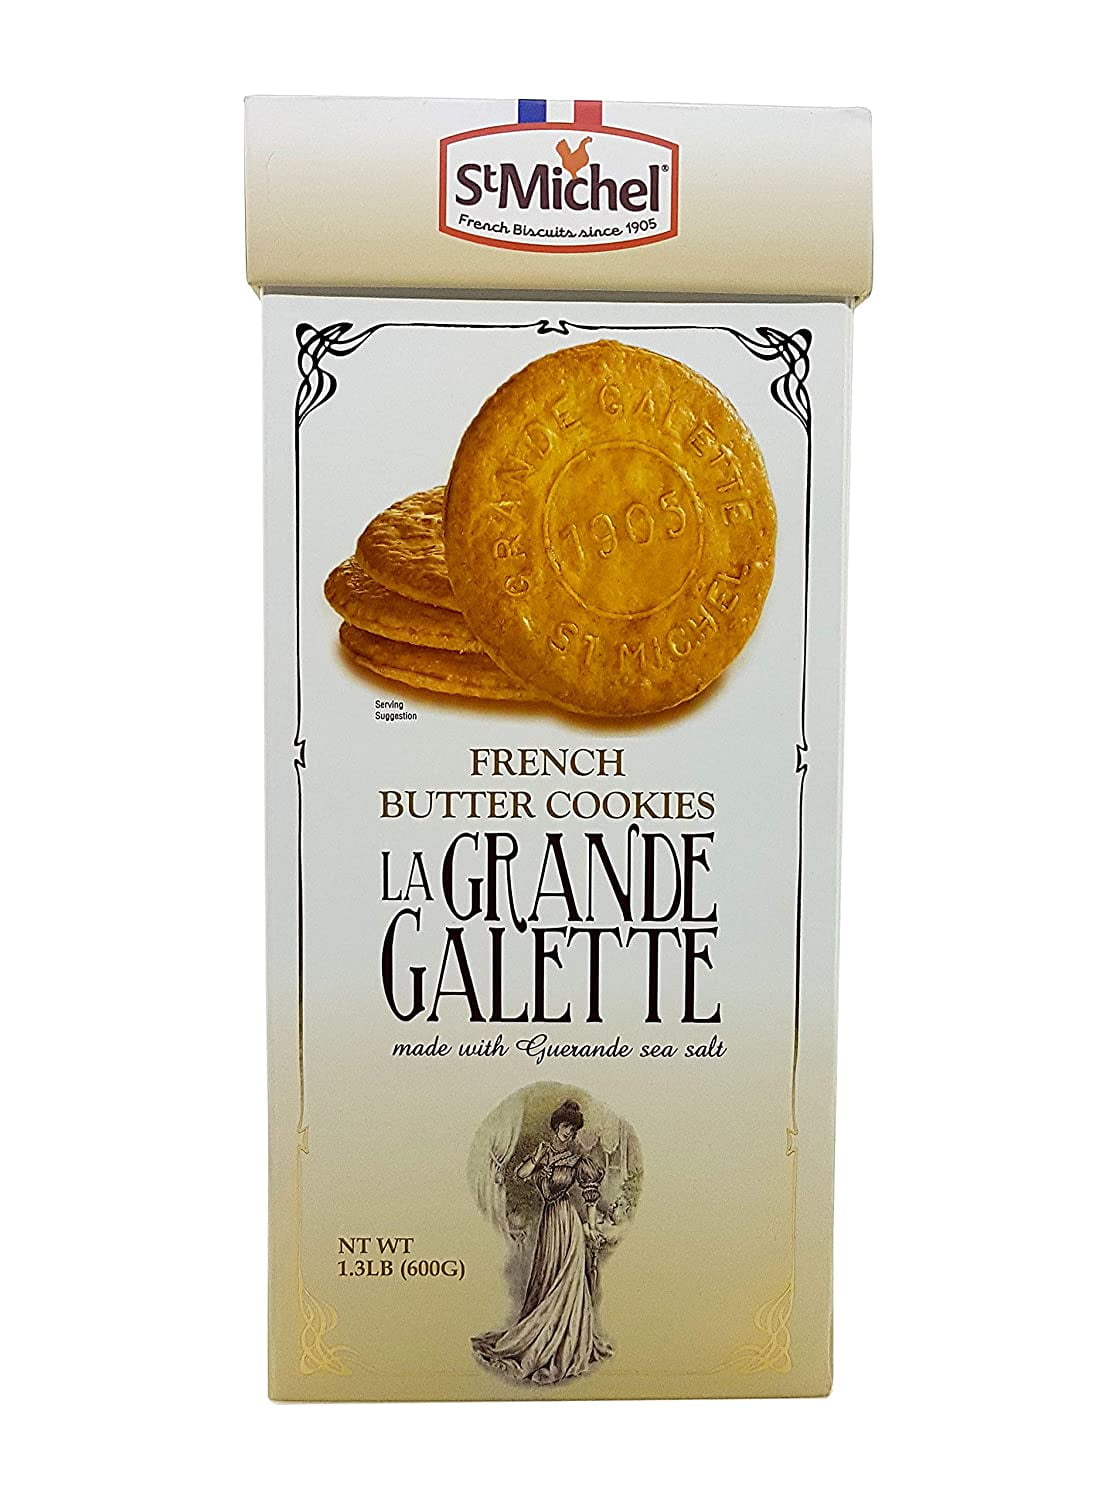 La Grande Galette French Butter Cookies by St. Michel 1.3 lb. (600